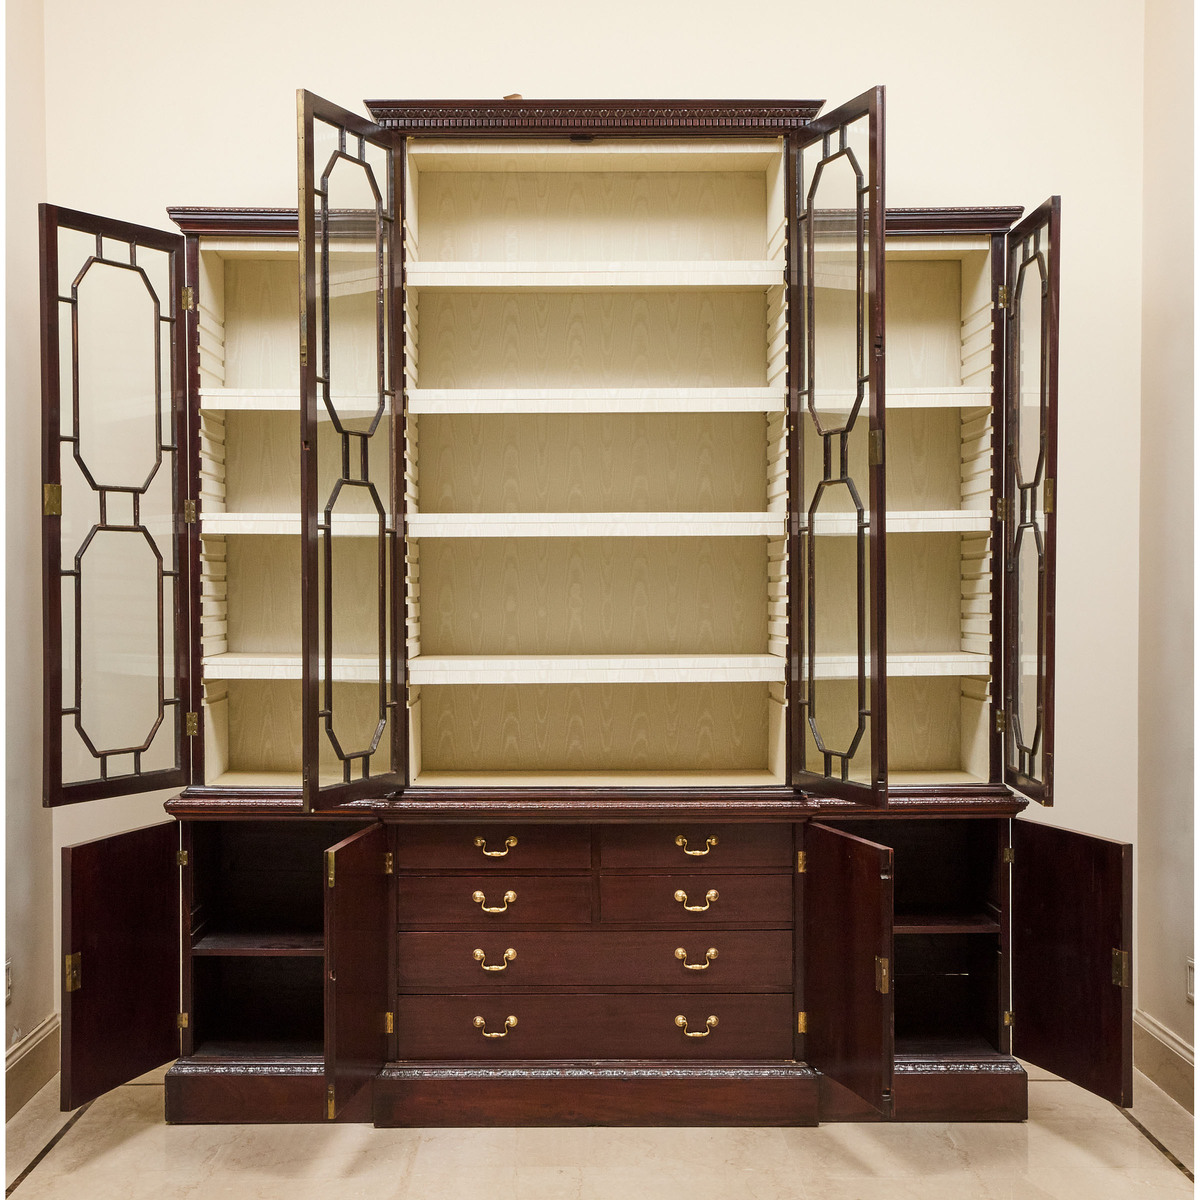 George II Mahogany Breakfront Bookcase, 19th century, 99 x 84 in — 251.5 x 213.4 cm - Image 2 of 2